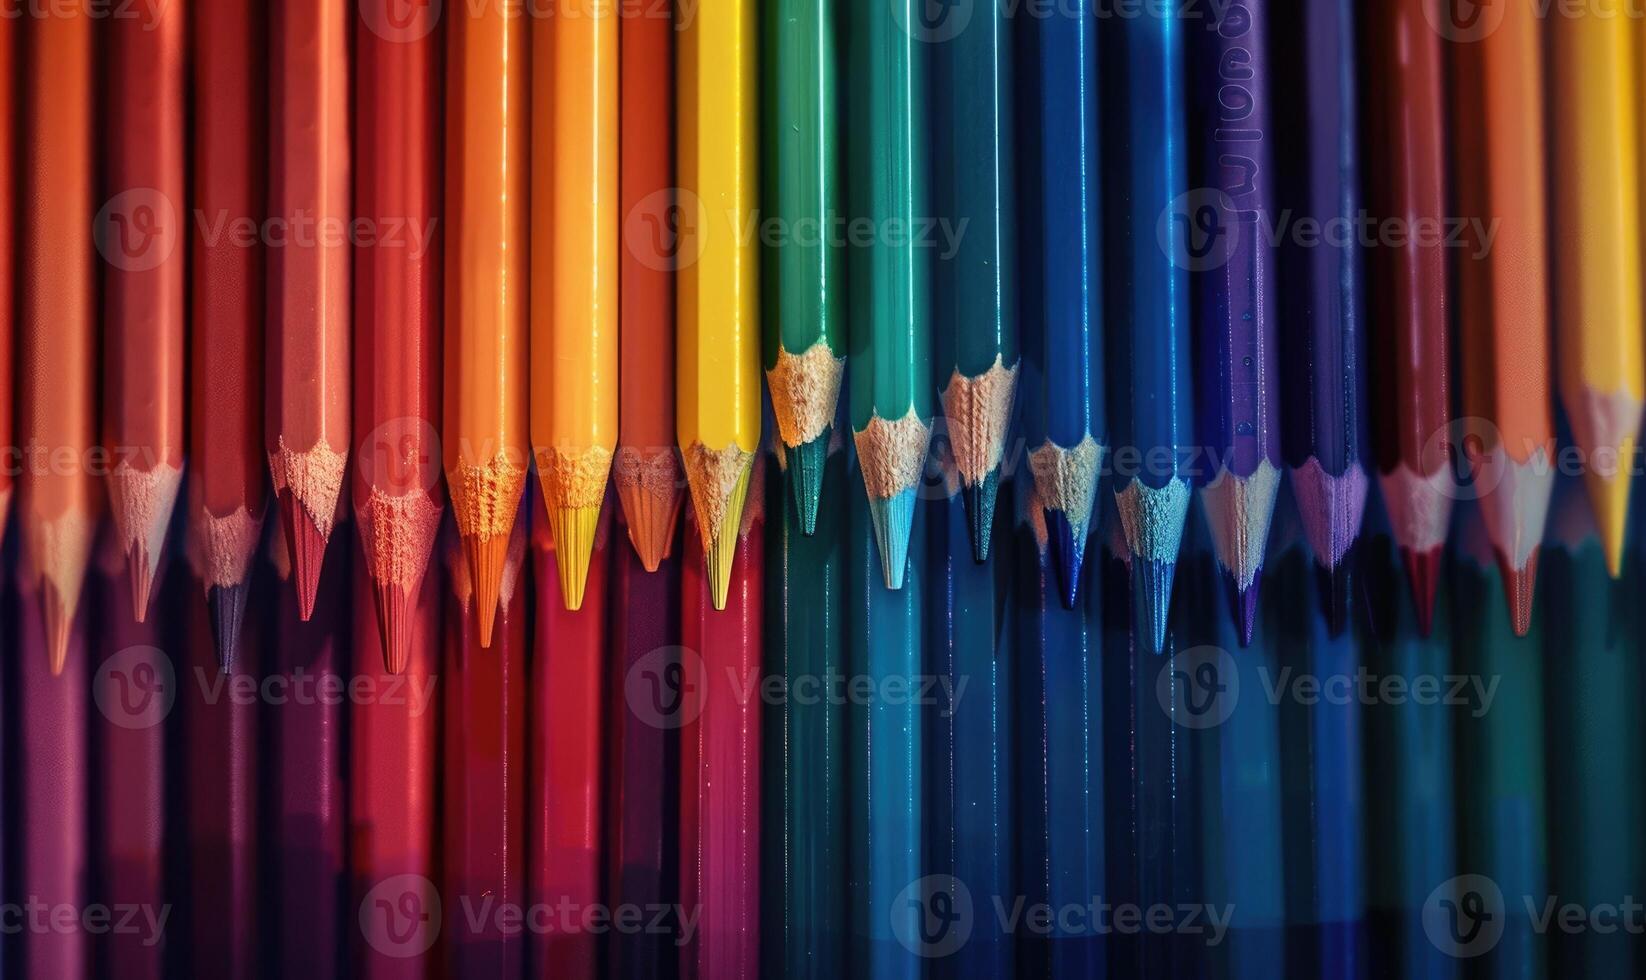 Colored pencils arranged neatly in a row photo